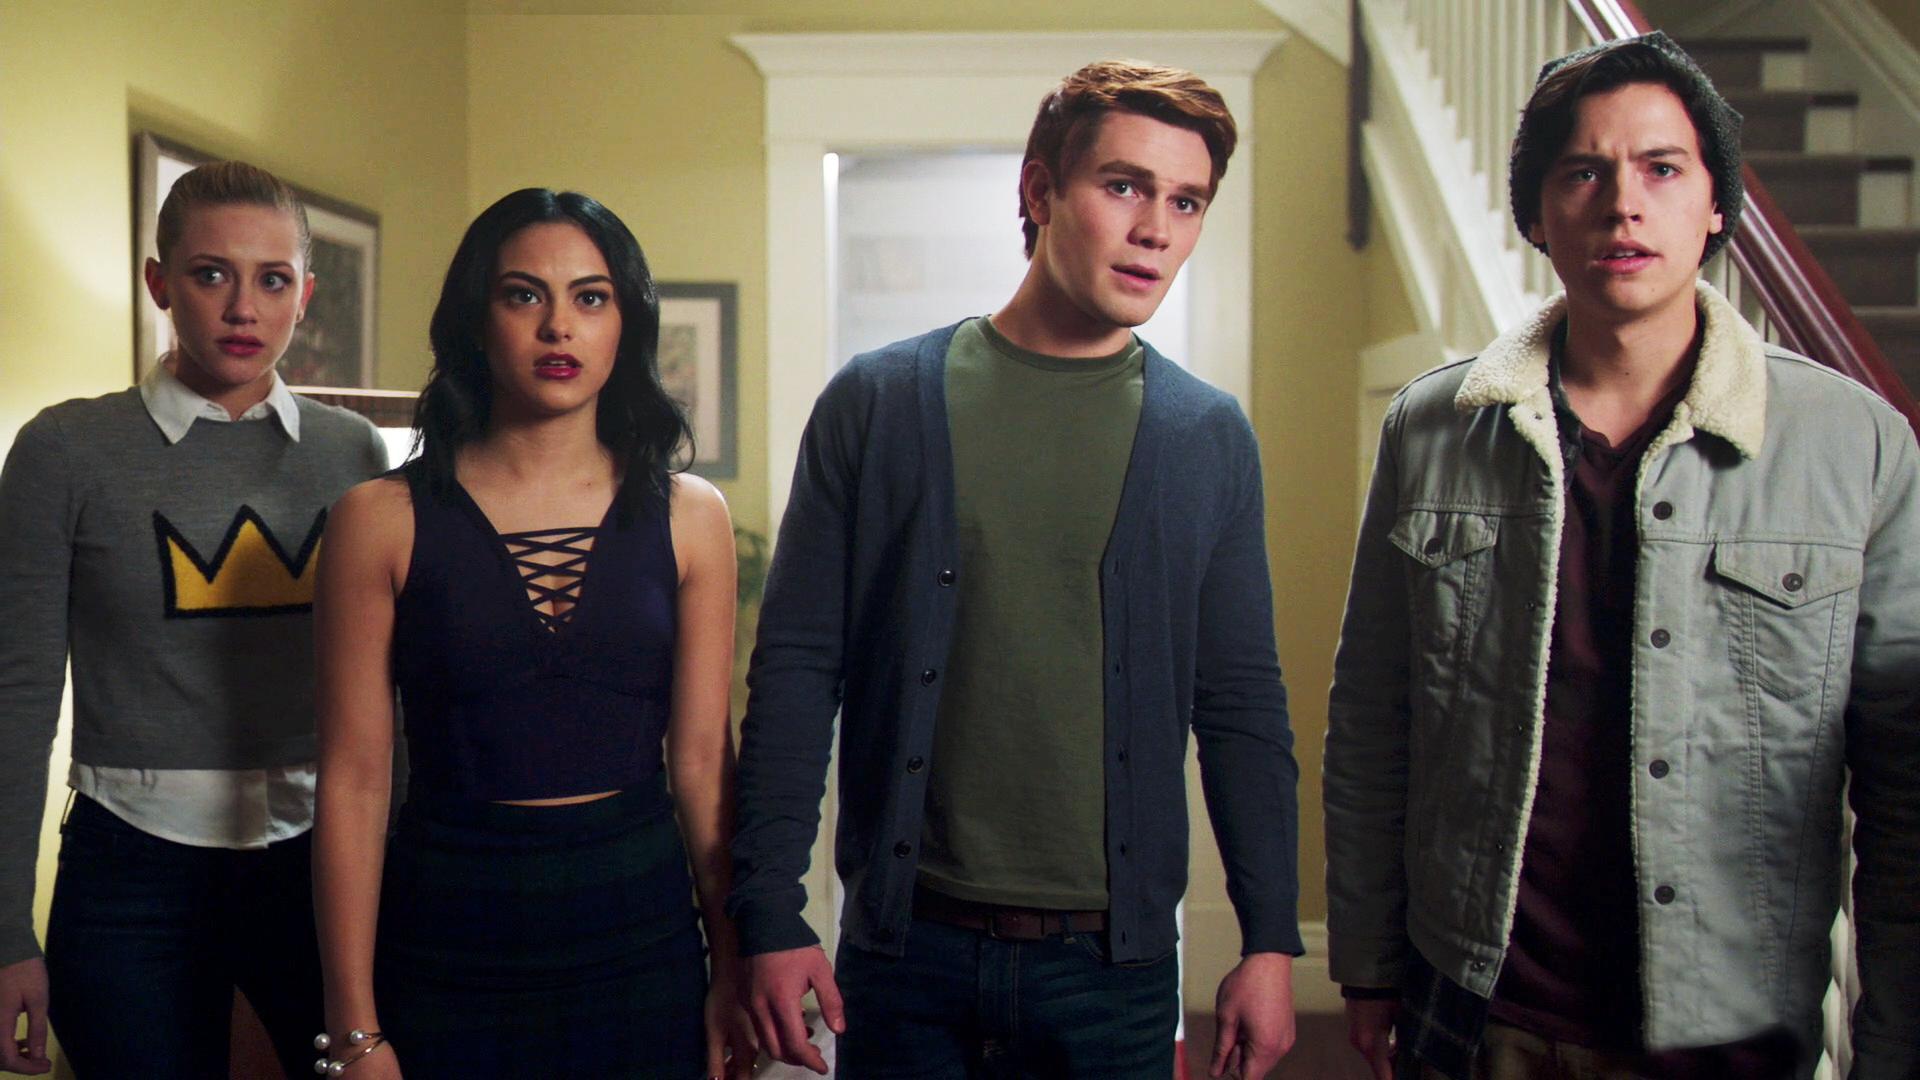 Here's How To Watch Riverdale Season 2's First Episode On Netflix